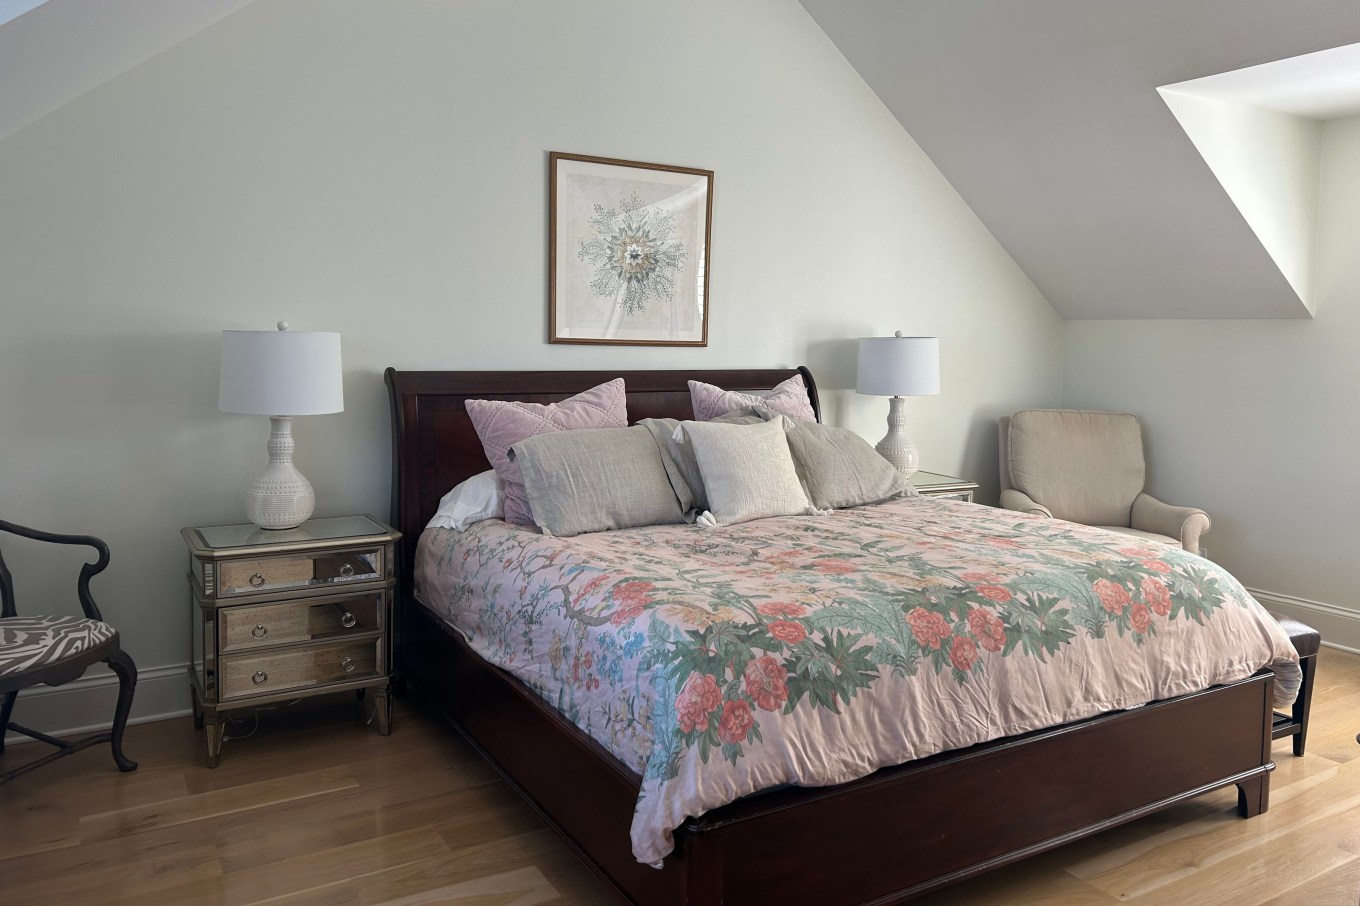 A beautiful, made bed with floral sheets in a room with white walls.